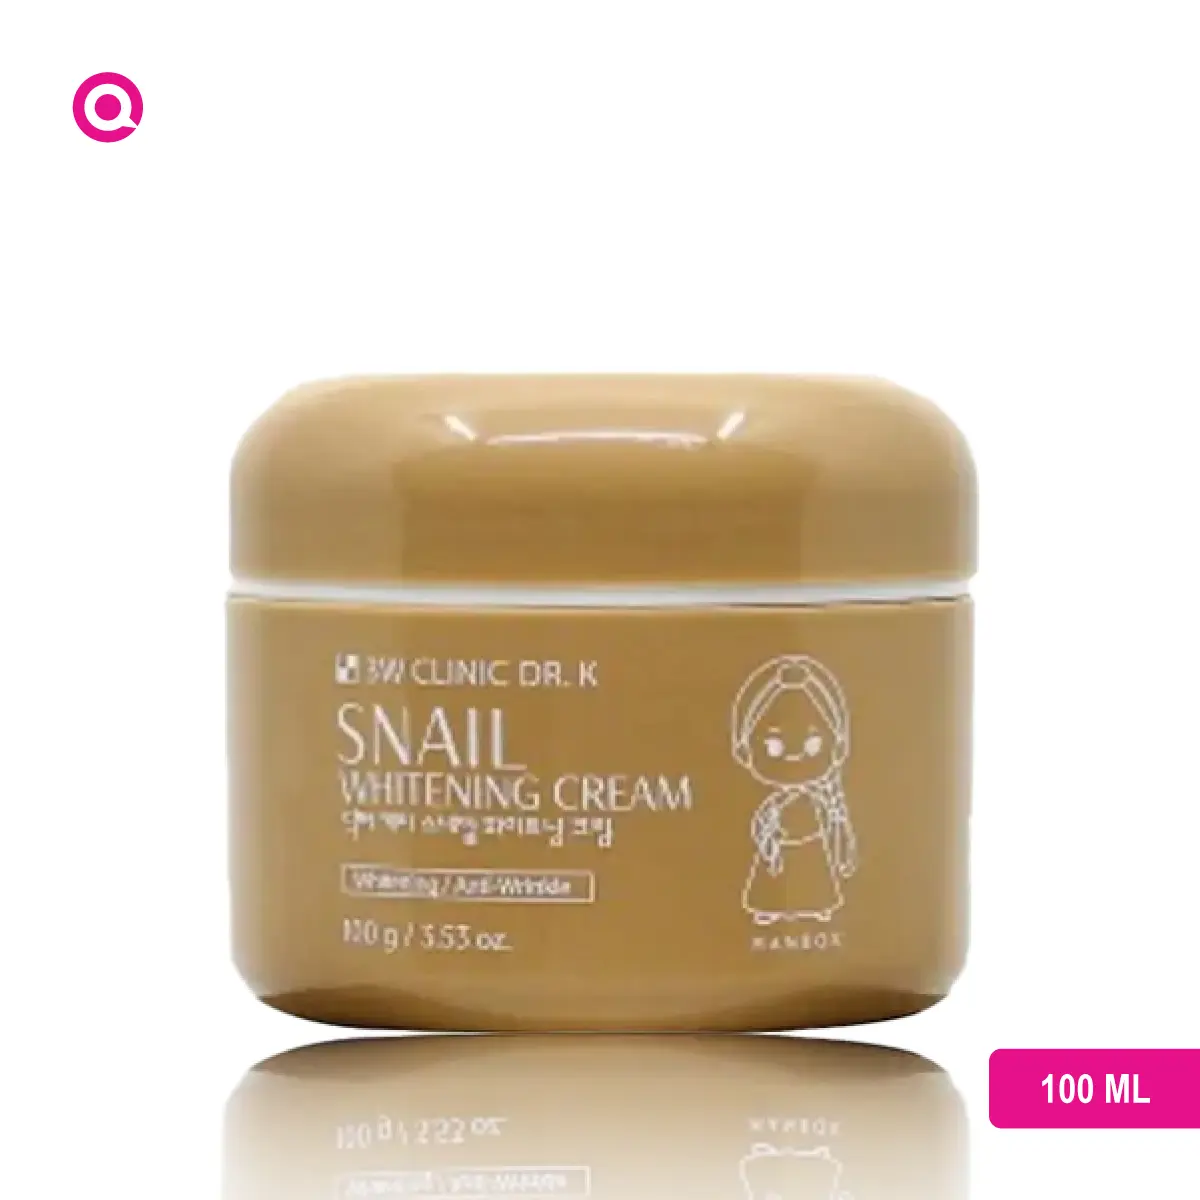 3W Clinic Dr. K Snail Whitening Cream product image - Radiant and Flawless Skin-01